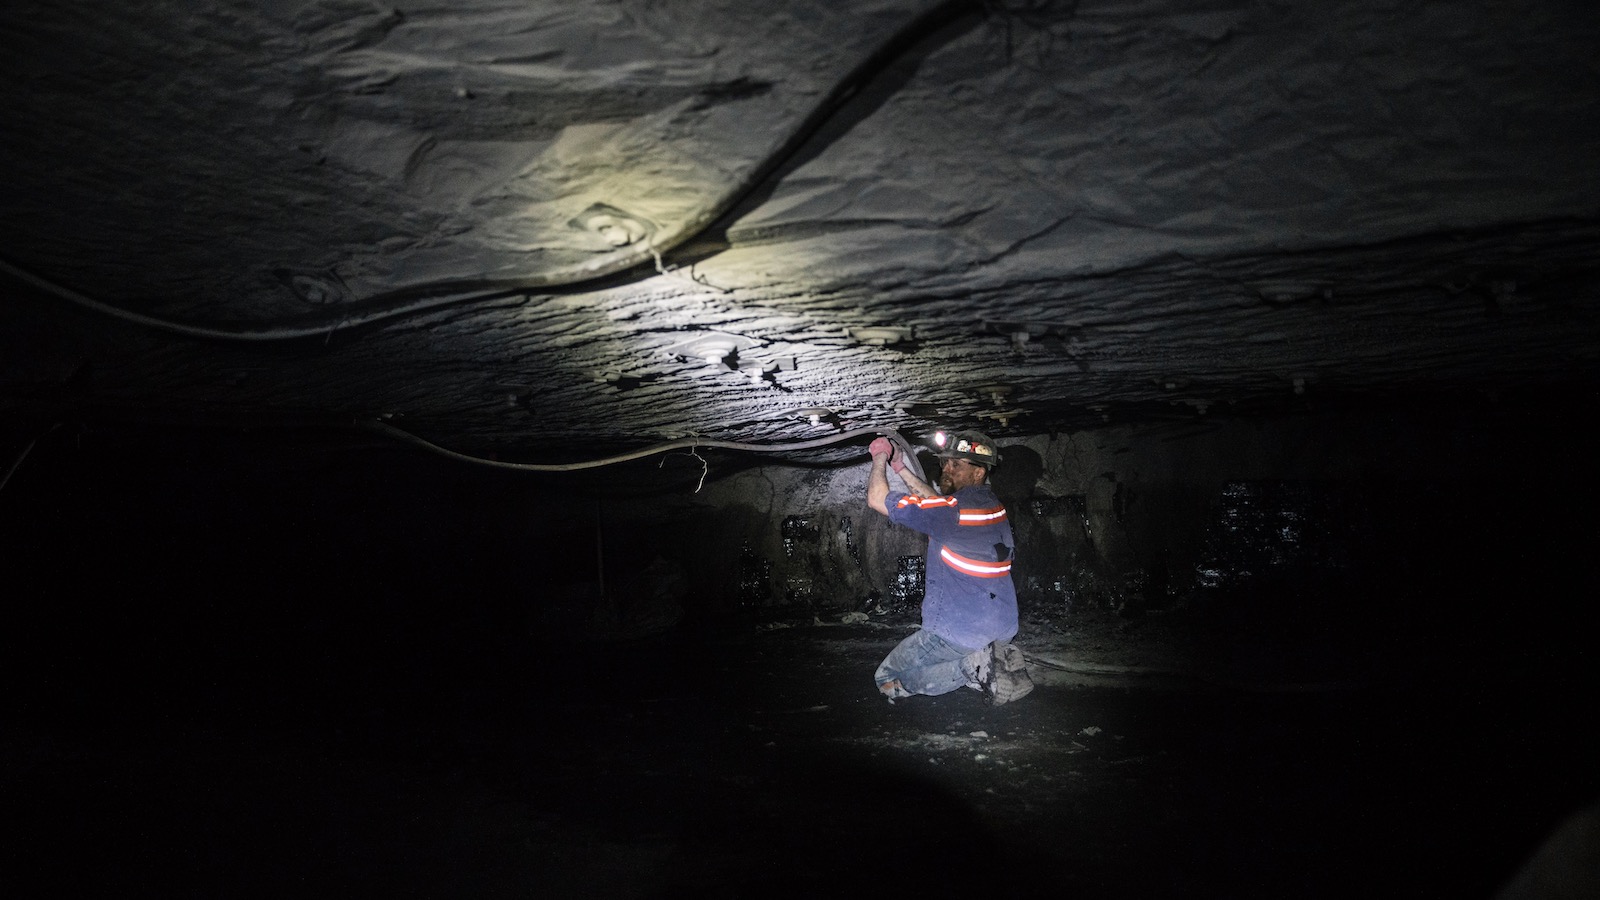 A coal miner in blue coveralls and a helmet works underground in a cramped space illuminated only by his headlamp.